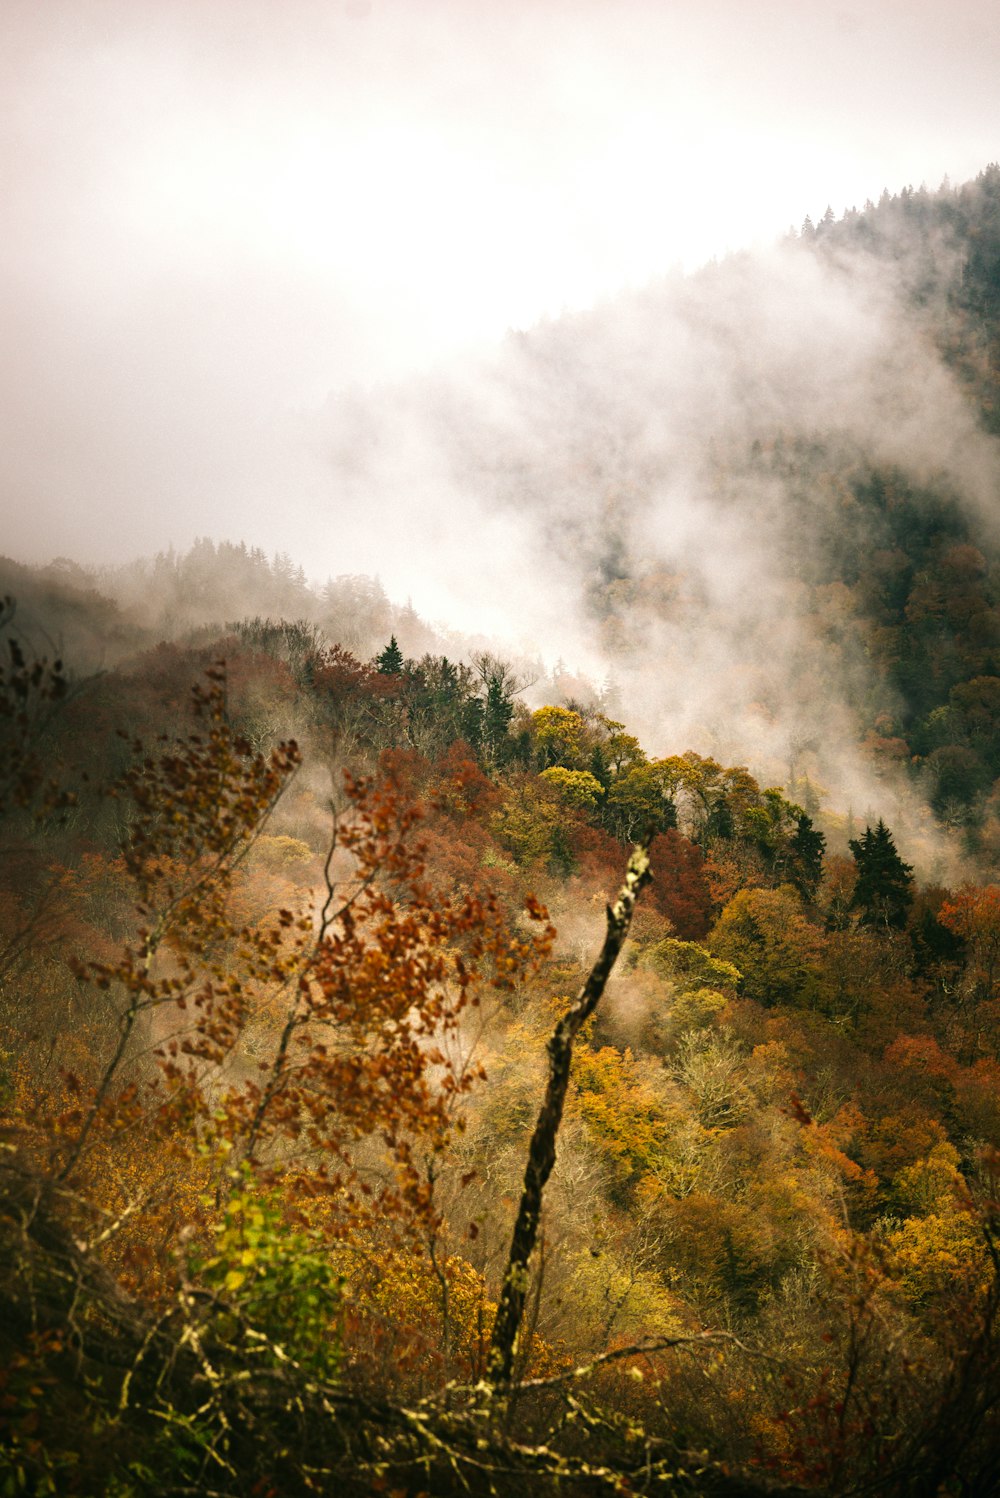 a foggy mountain with trees in the foreground